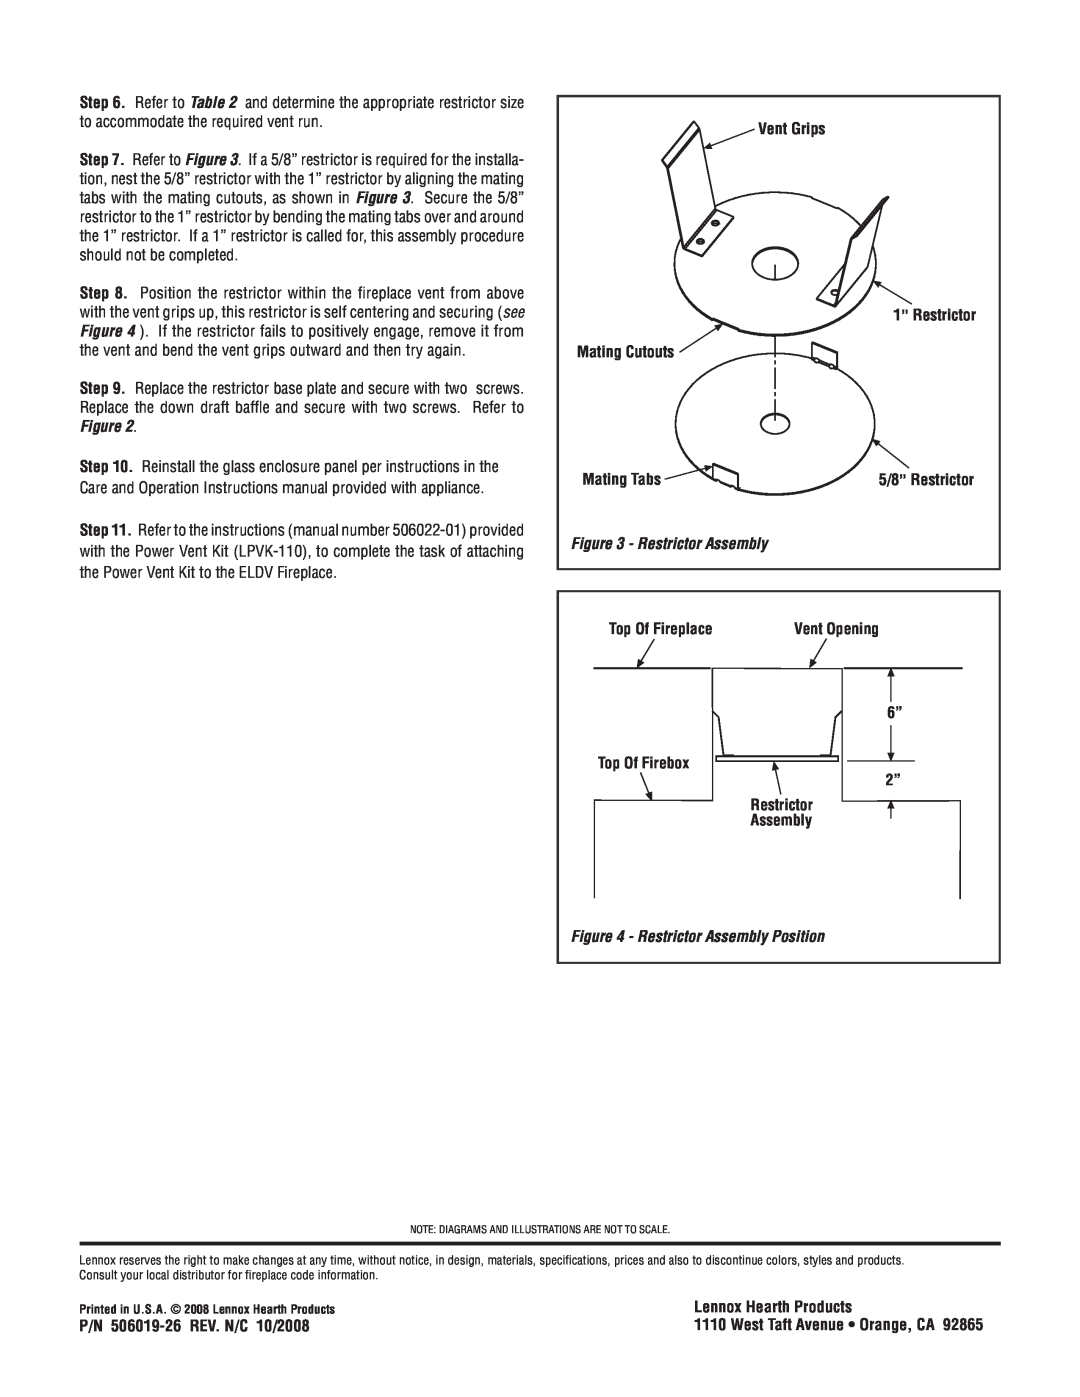 Lennox Hearth LPVK-110 installation instructions Restrictor Assembly Position, Vent Grips 1” restrictor Mating Cutouts 